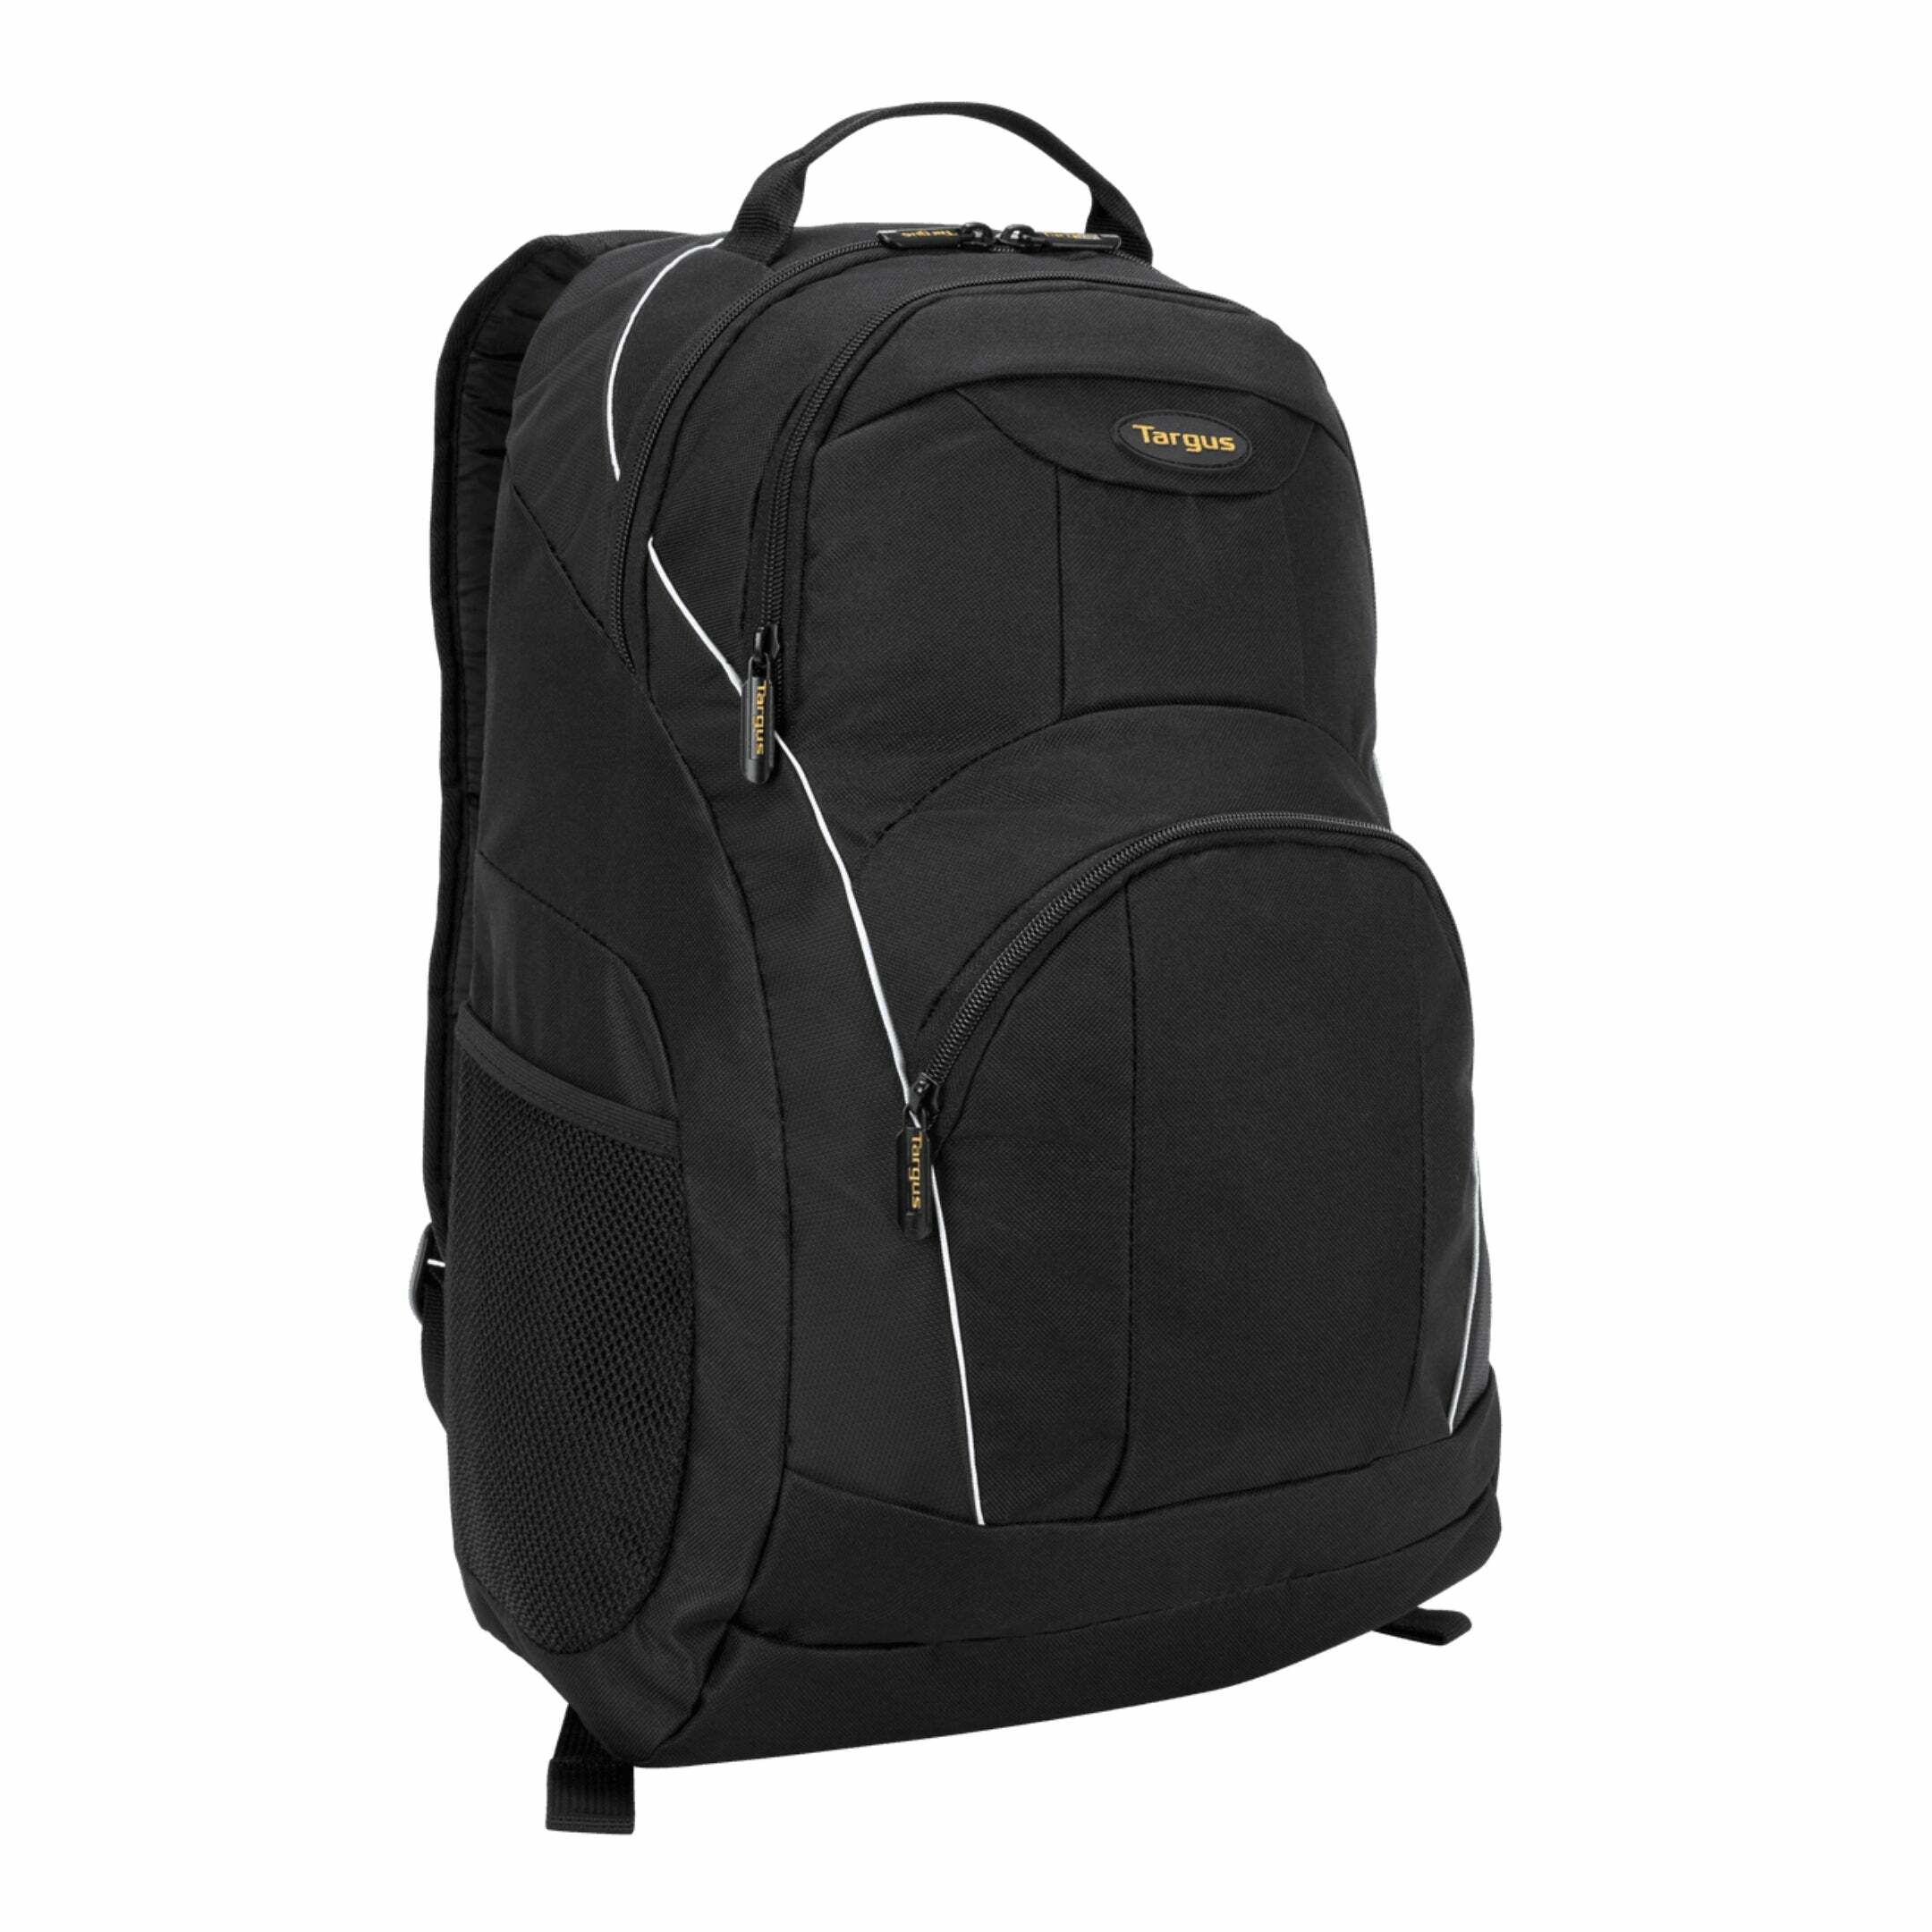 Targus Motor Series - 16-Inch Protective Laptop Backpack, Black with Stylish Accents